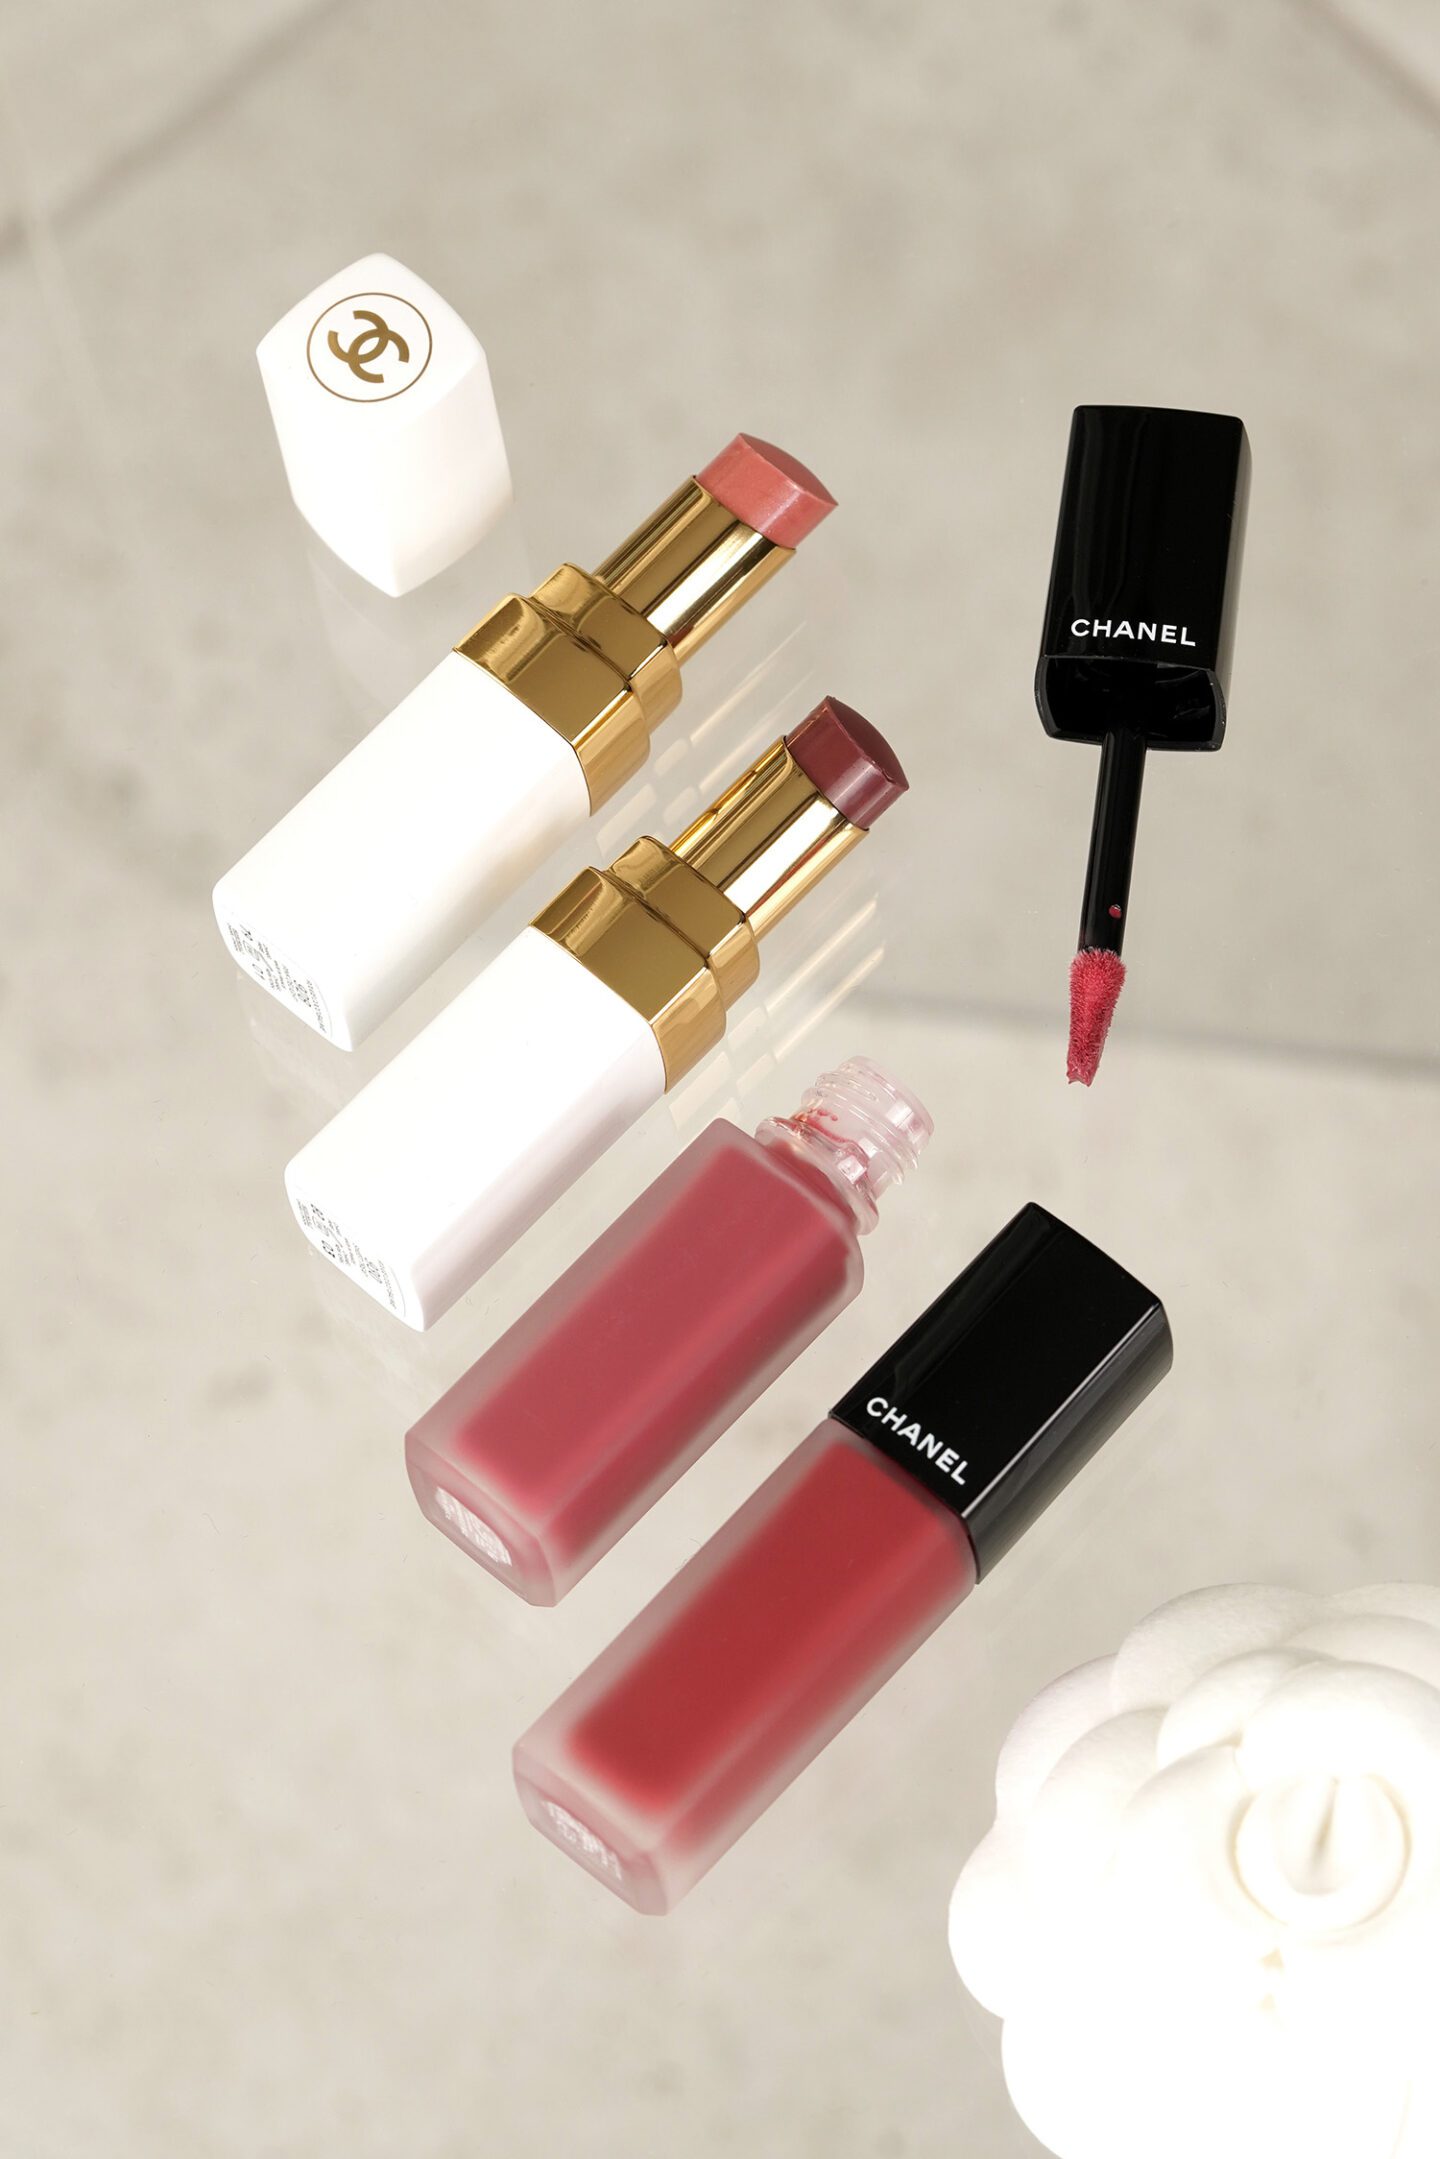 Chanel Les Delices Rouge Coco Baume and Rouge Allure Ink